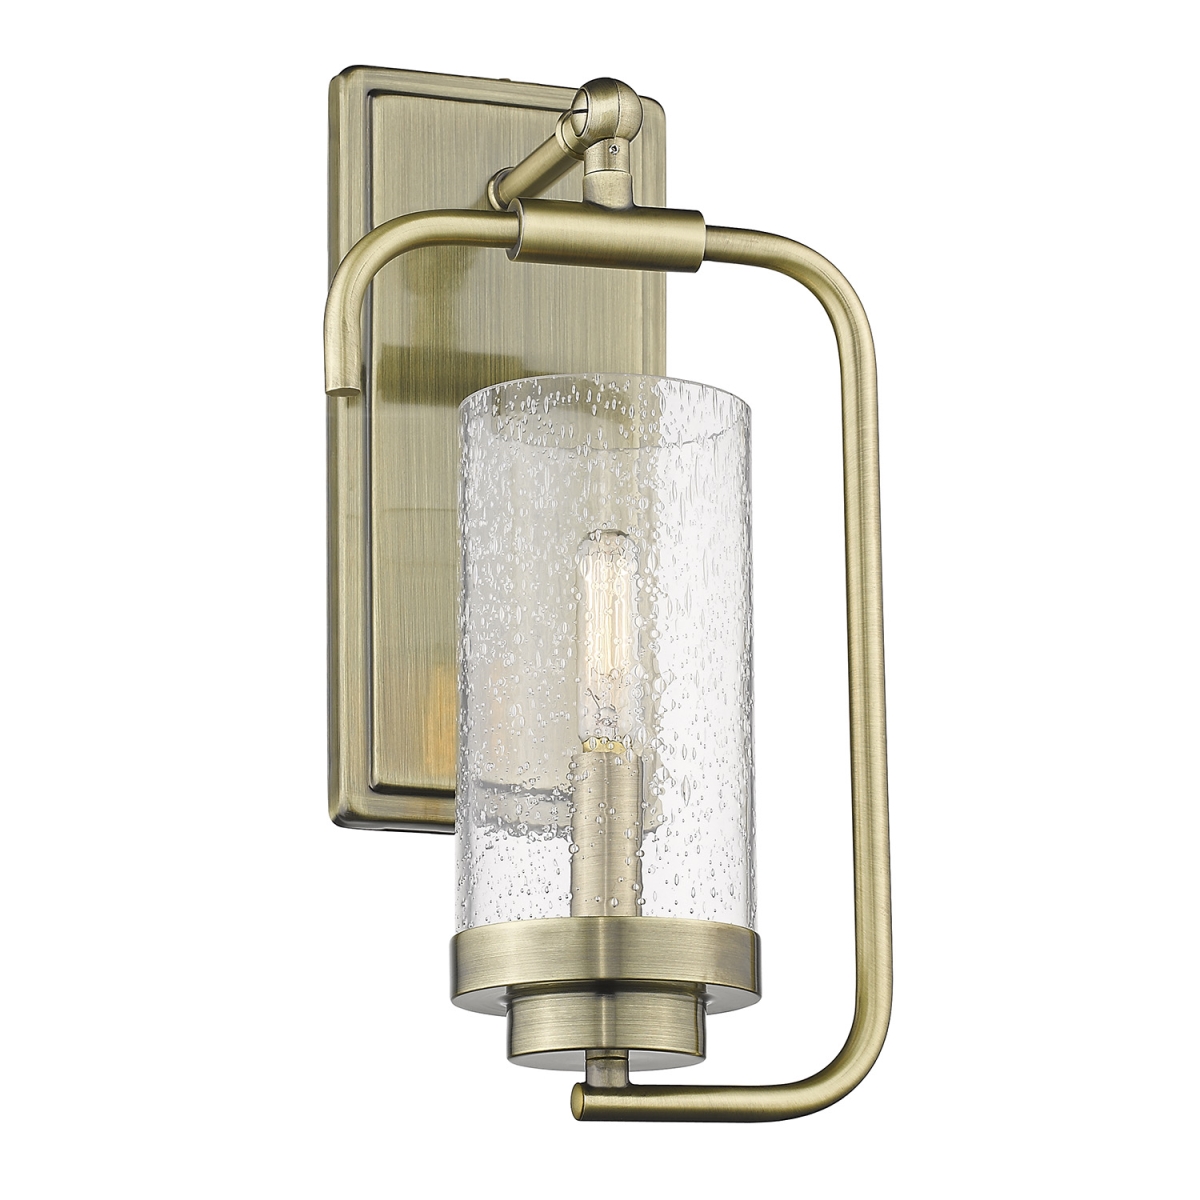 2380-1w Ab-sd Holden 1-light Wall Sconce, Aged Brass